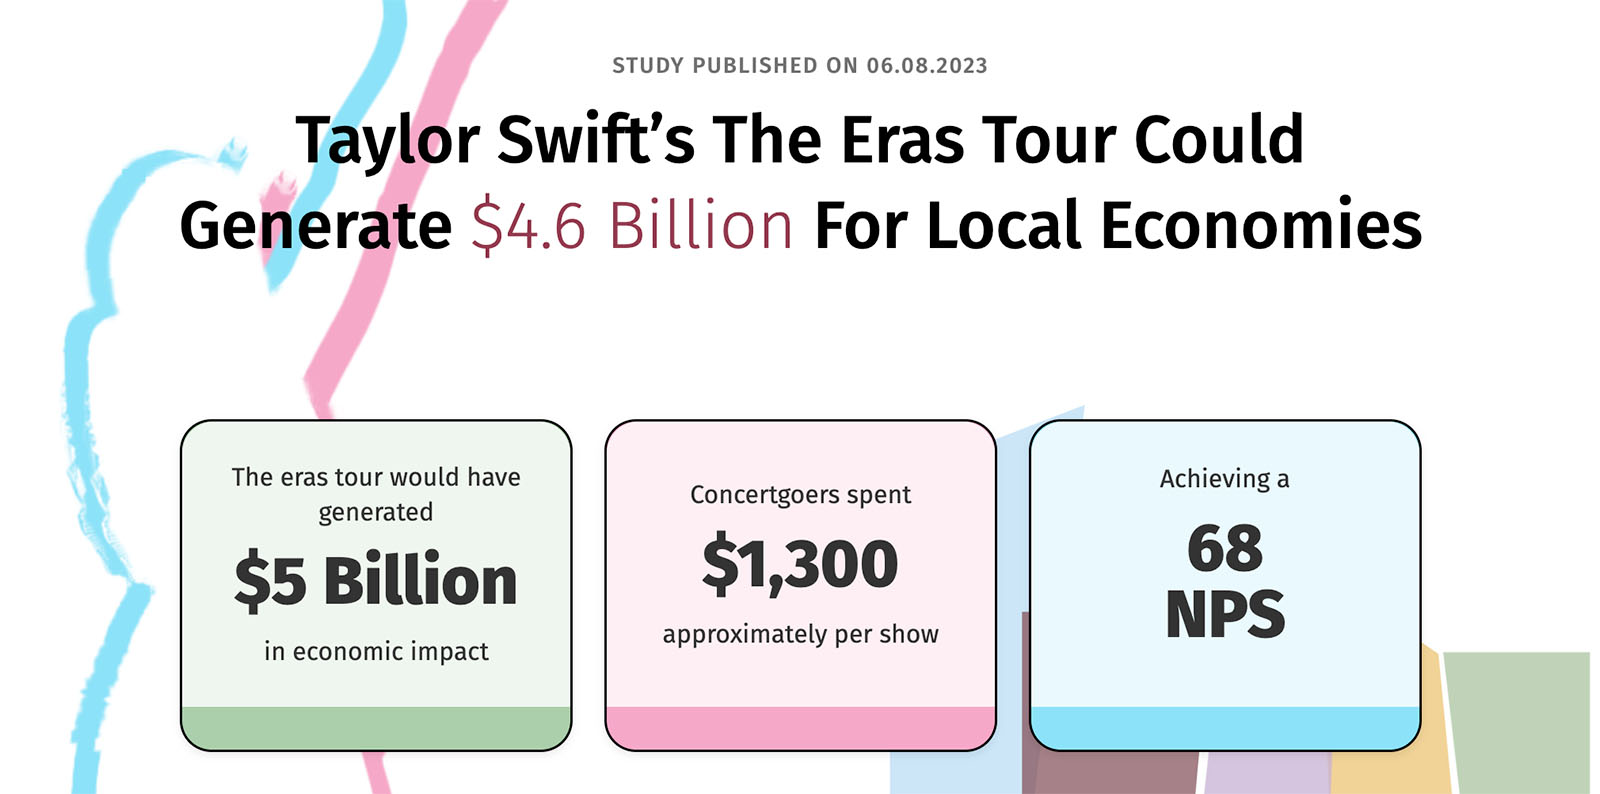 5 ways for QSRs to prepare for Taylor Swift's Eras Tour - PredictHQ